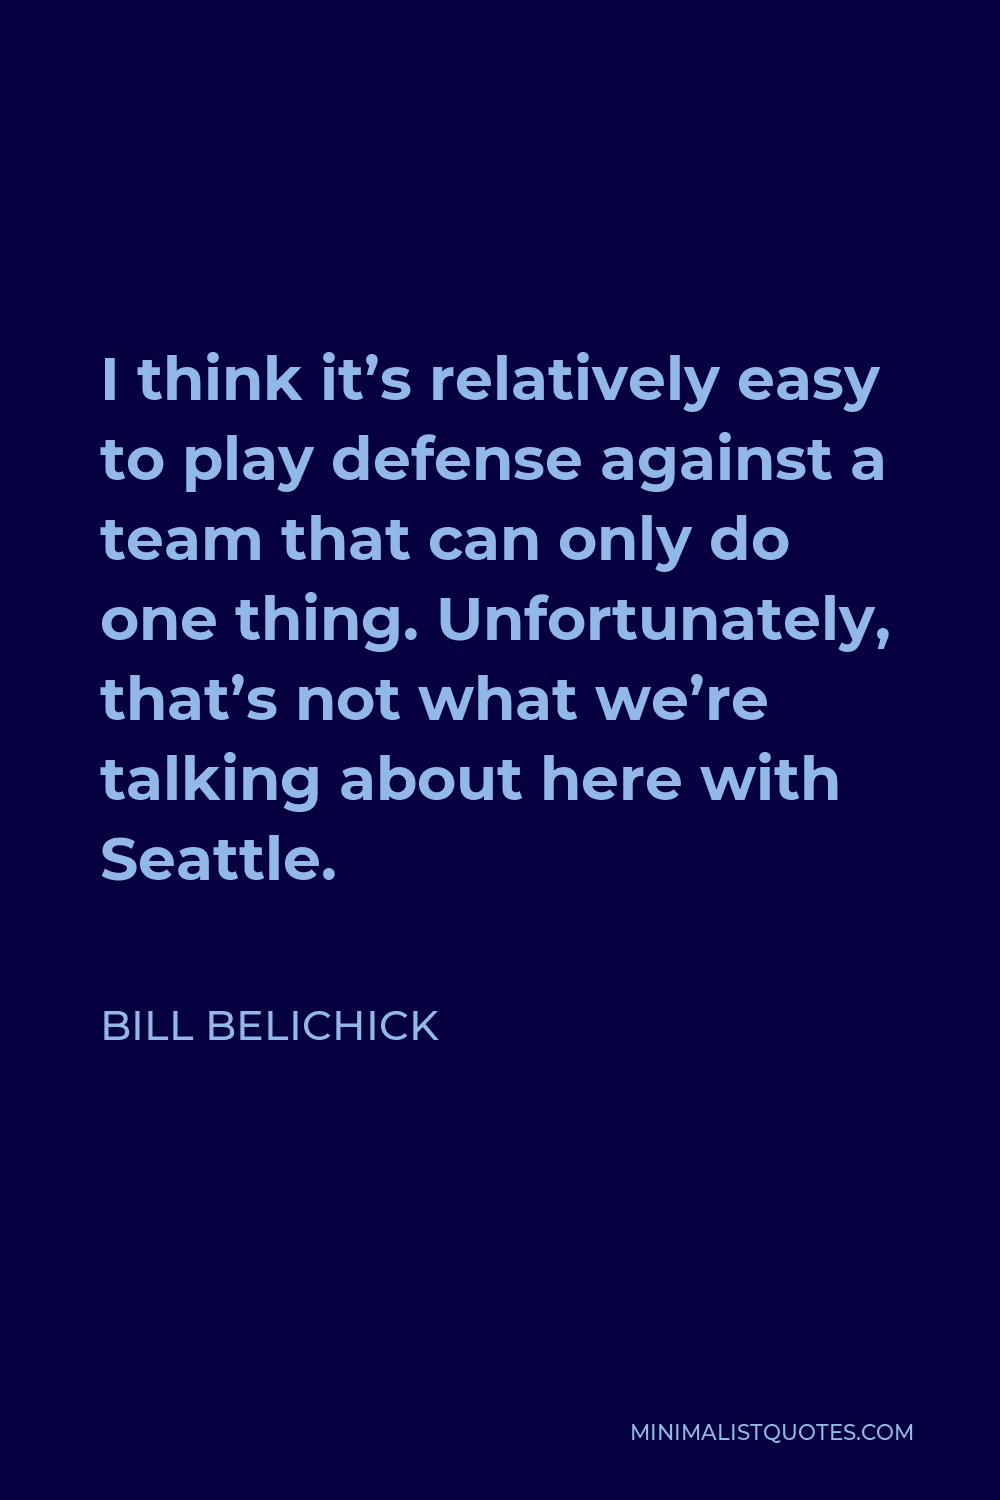 Bill Belichick Quote - I think it’s relatively easy to play defense against a team that can only do one thing. Unfortunately, that’s not what we’re talking about here with Seattle.